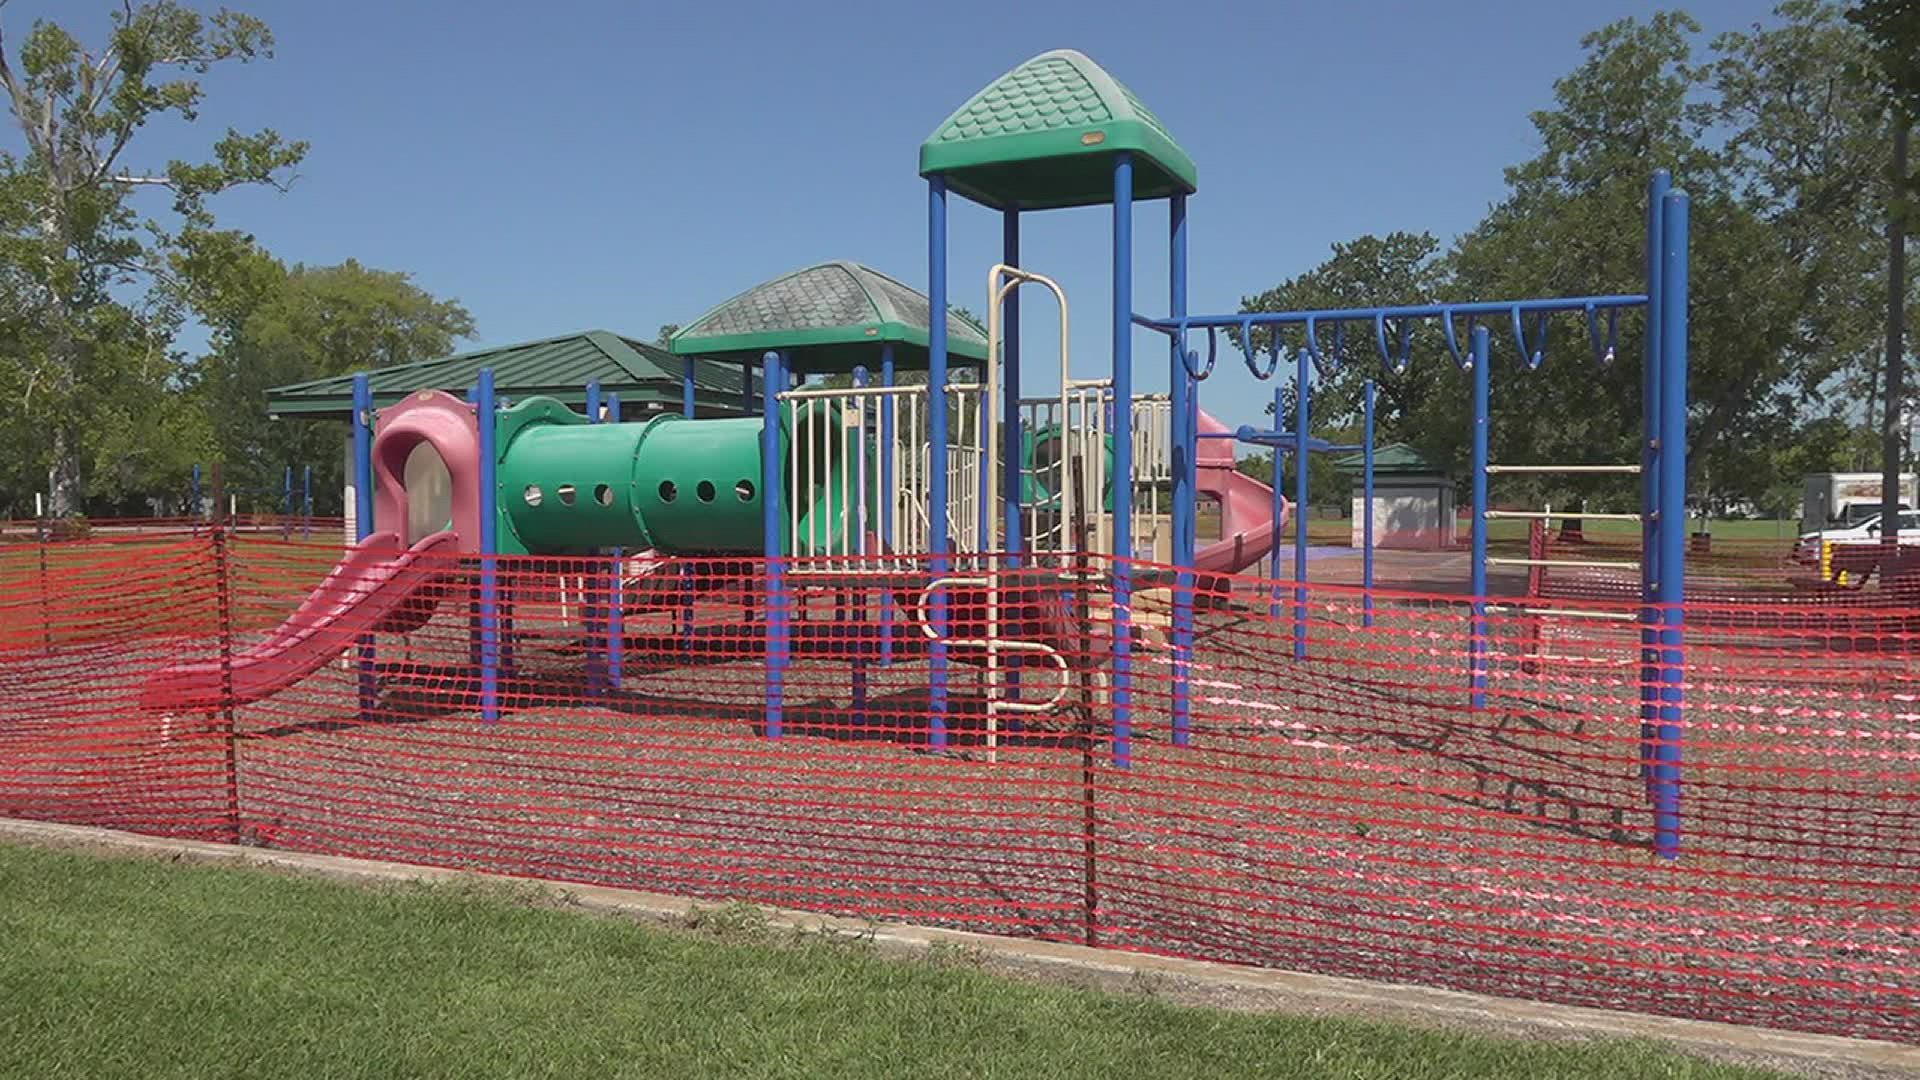 Residents said the park’s conditions were unsafe for kids due to its rusty equipment, exposed wood and moldy splash pads.